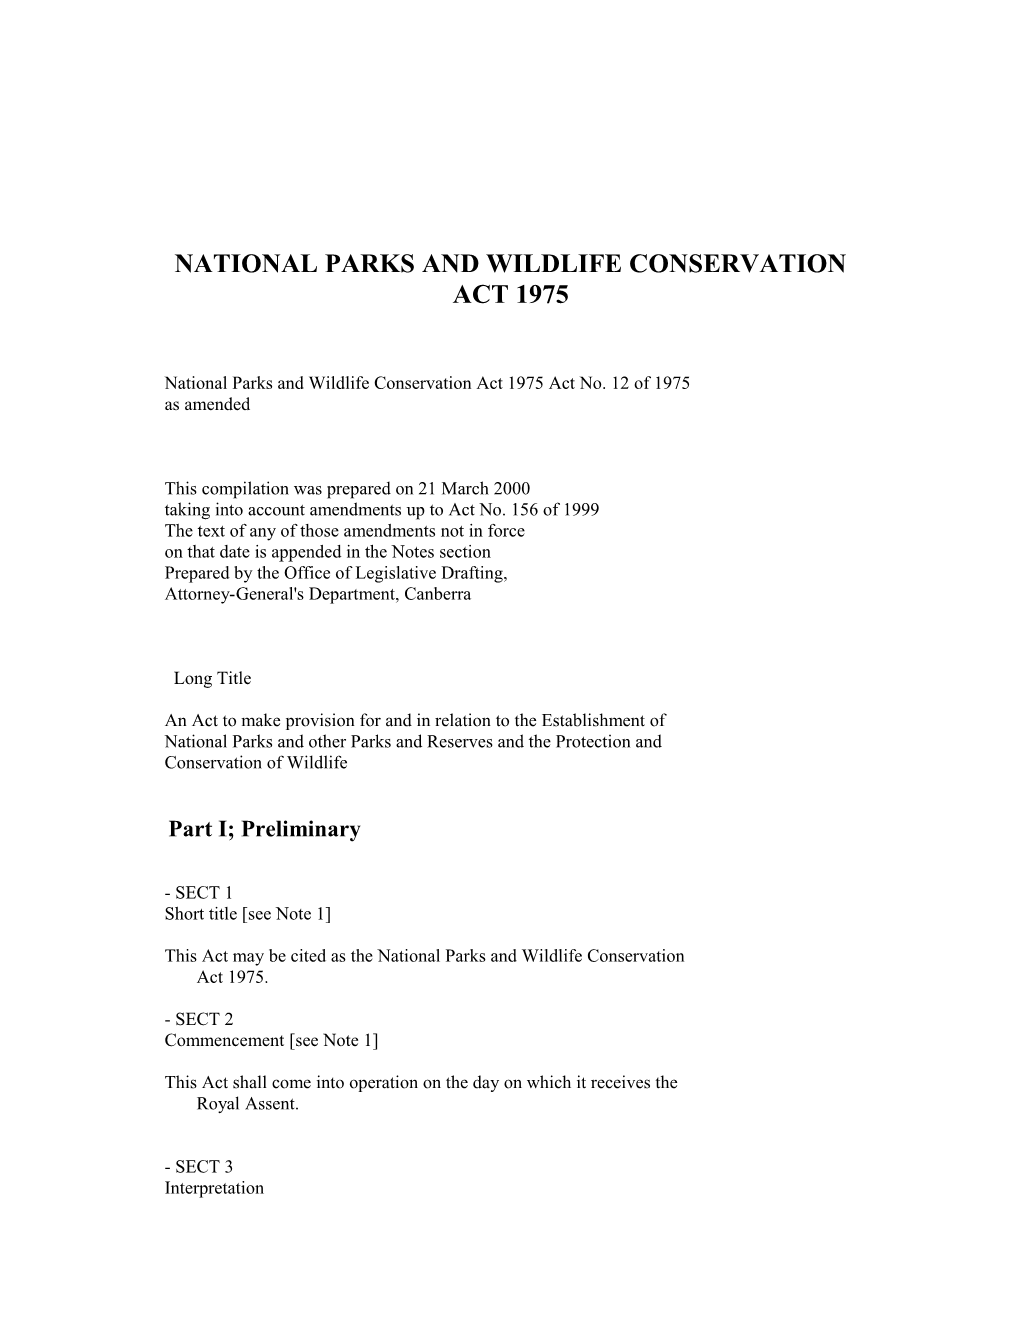 National Parks and Wildlife Conservation Act 1975